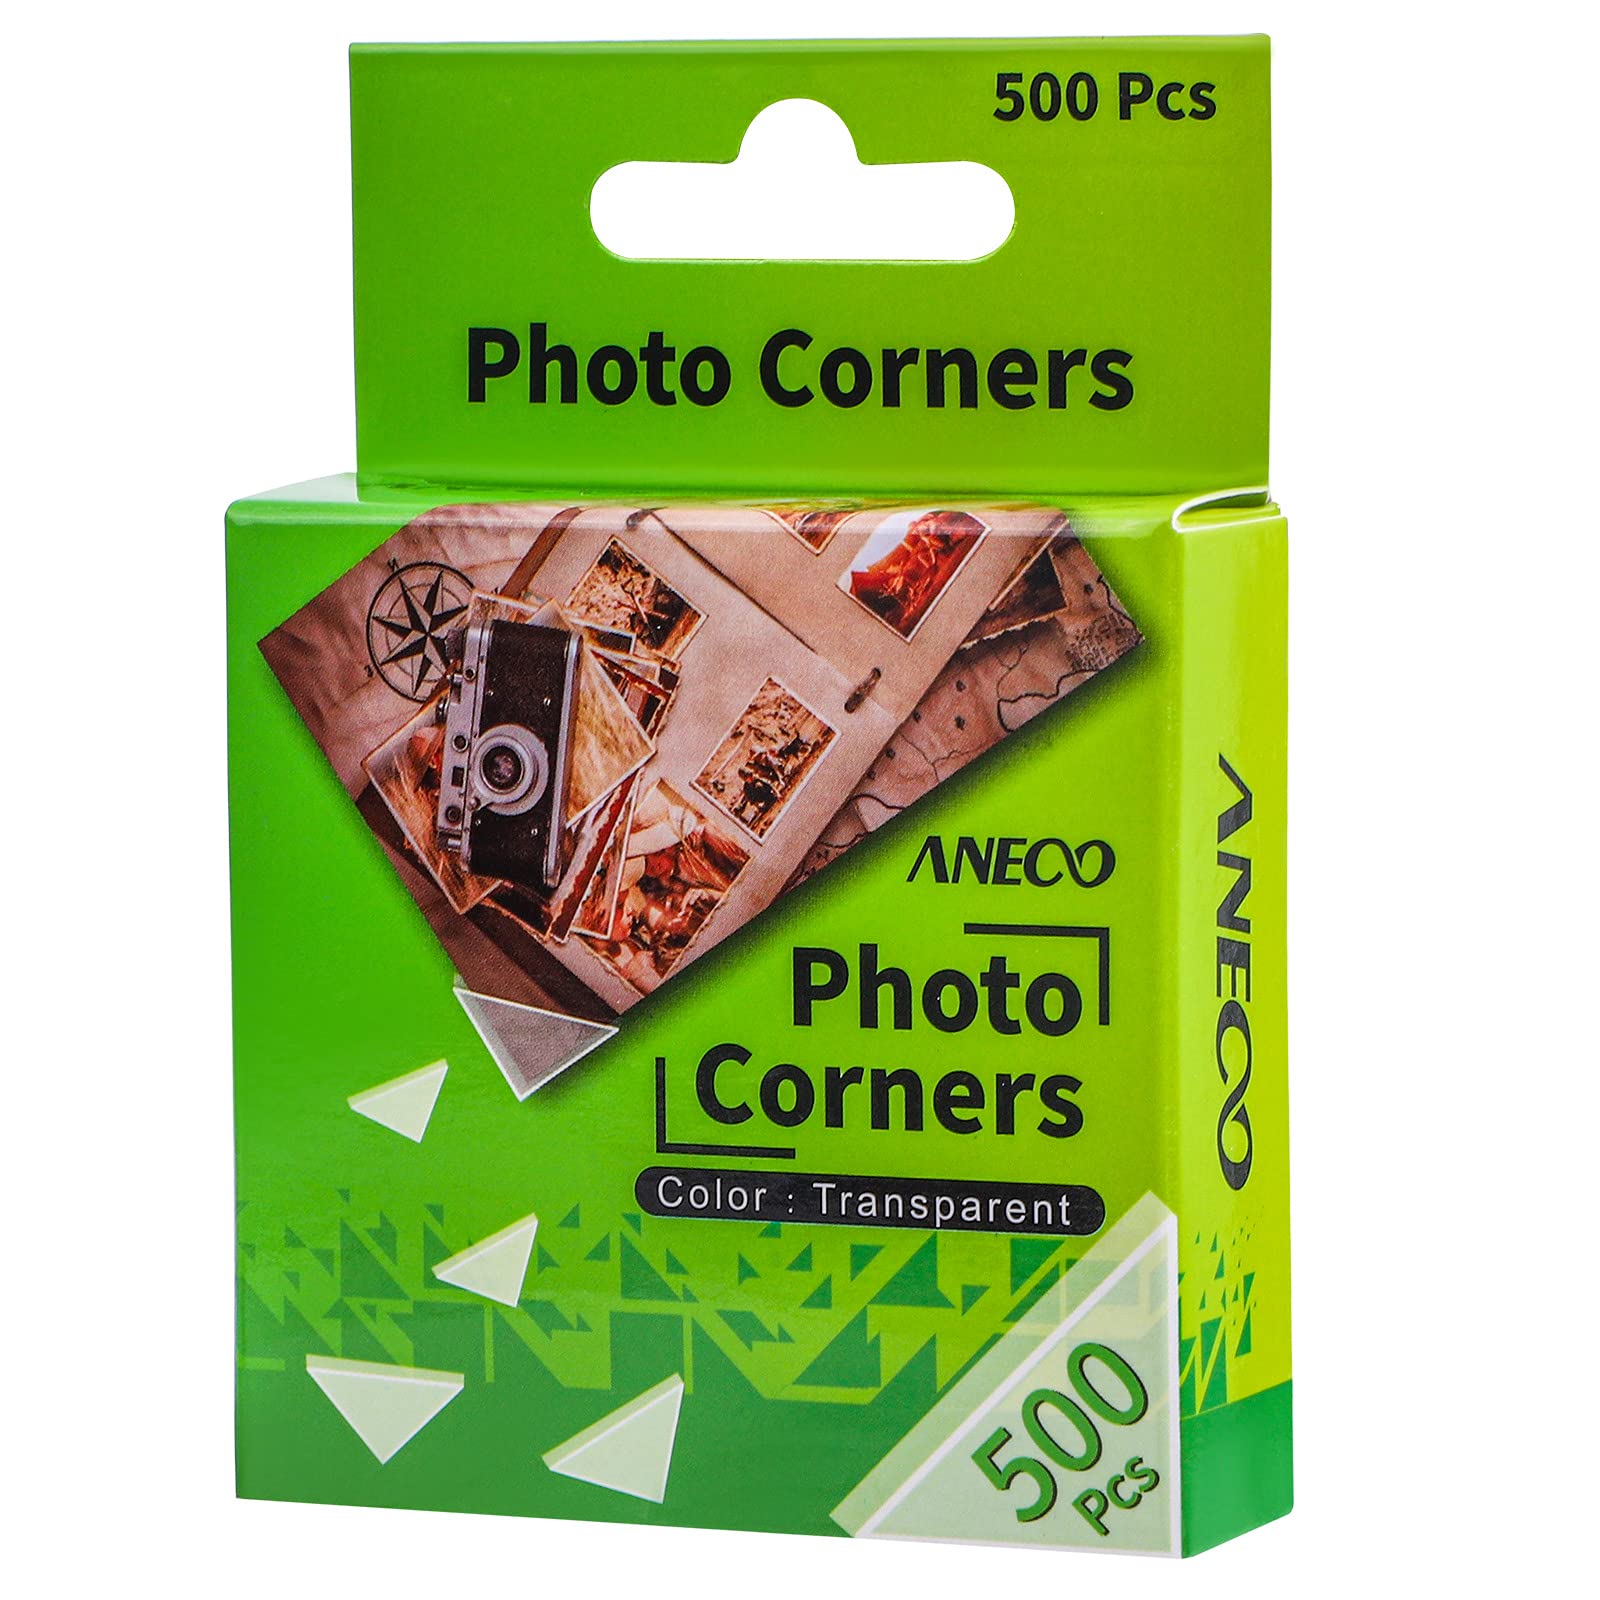 Aneco Transparent Photo Corners Clear Picture Mounting Corner Stickers for DIY Album, Scrapbook, Journal, 500 Pieces/Pack …